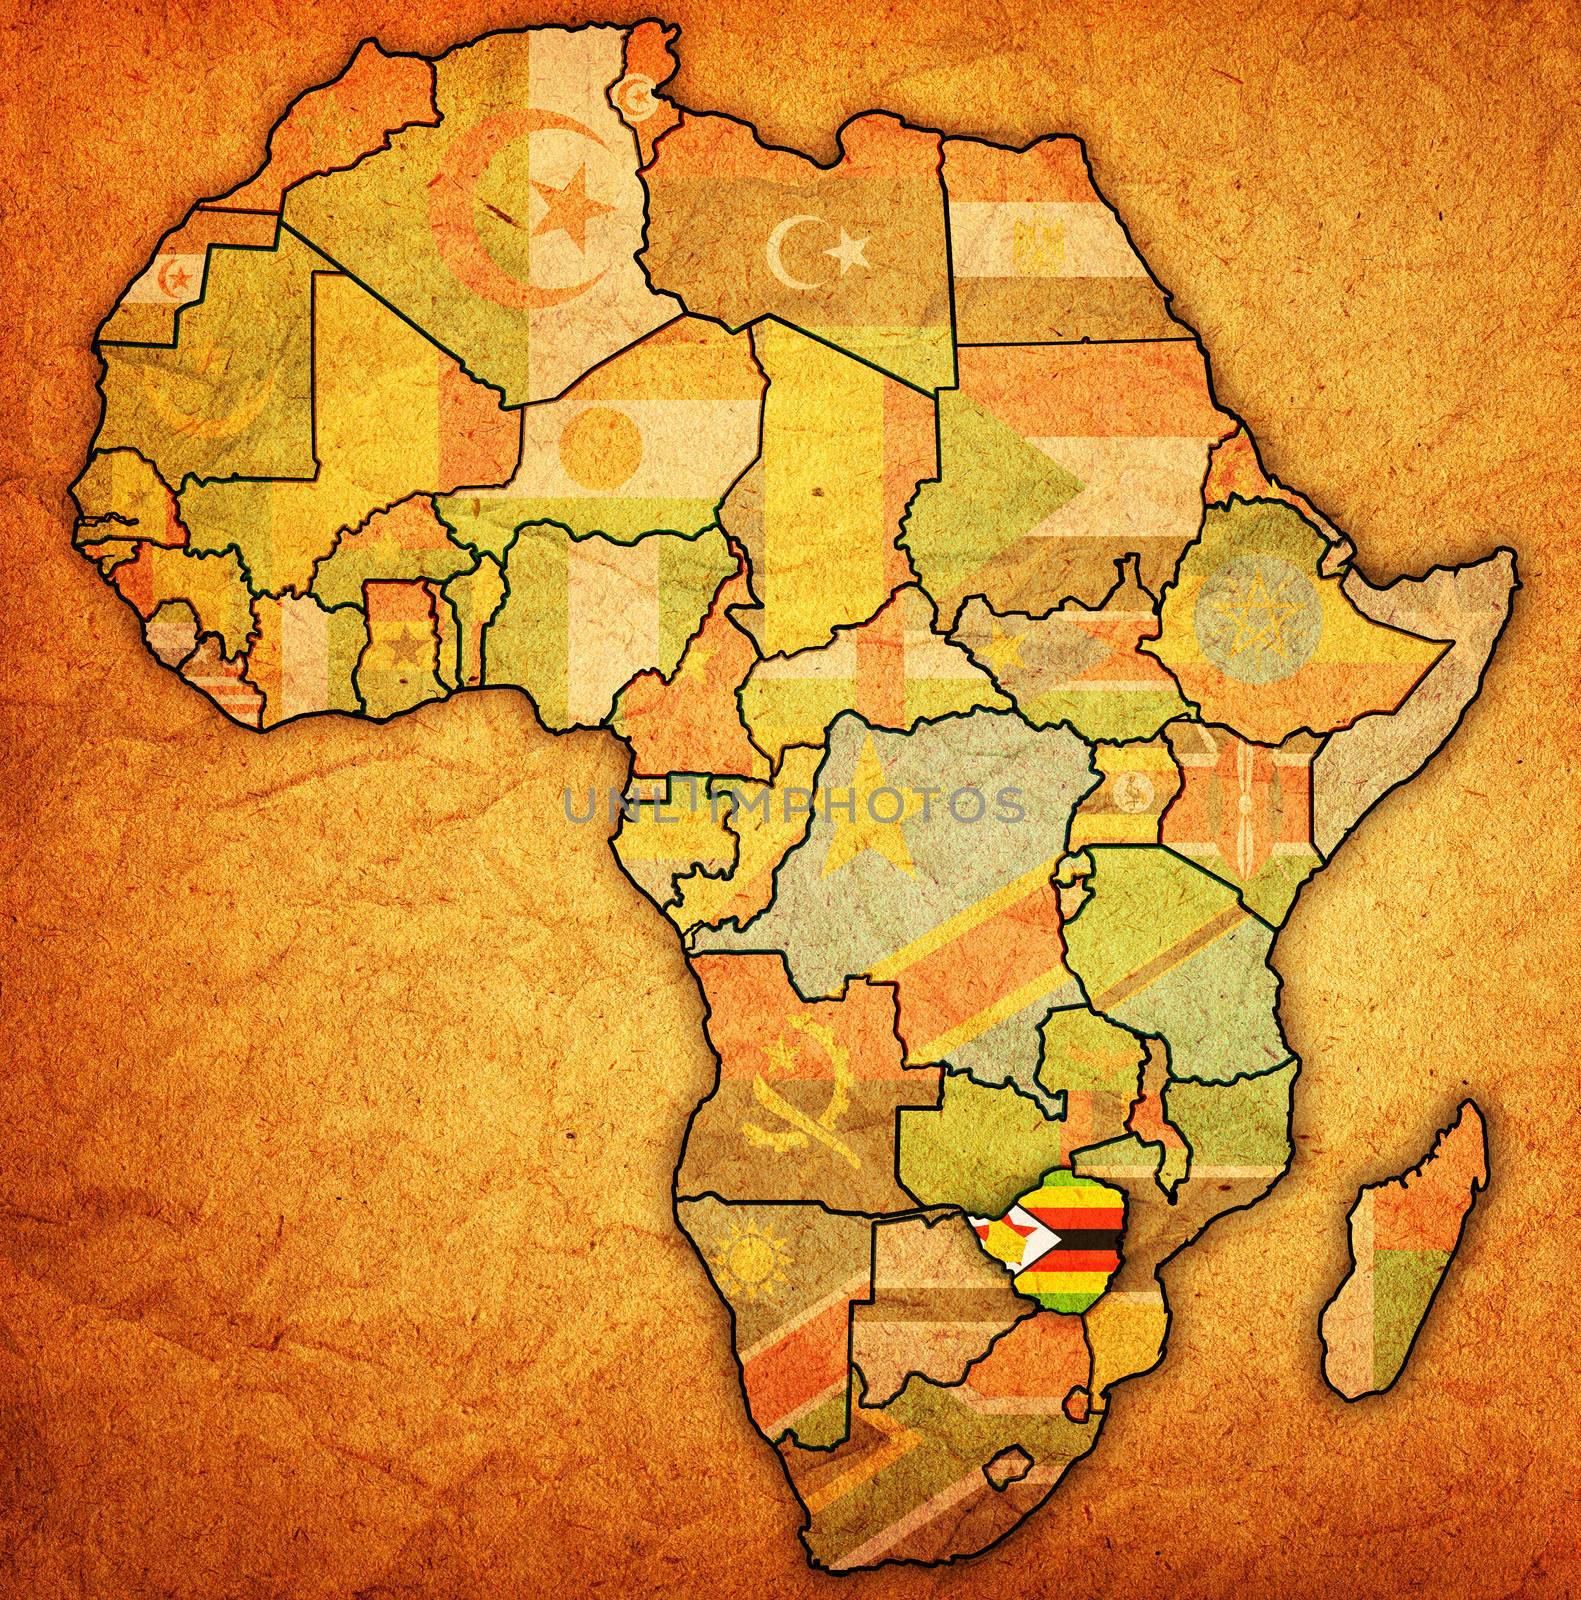 zimbabwe on actual map of africa by michal812